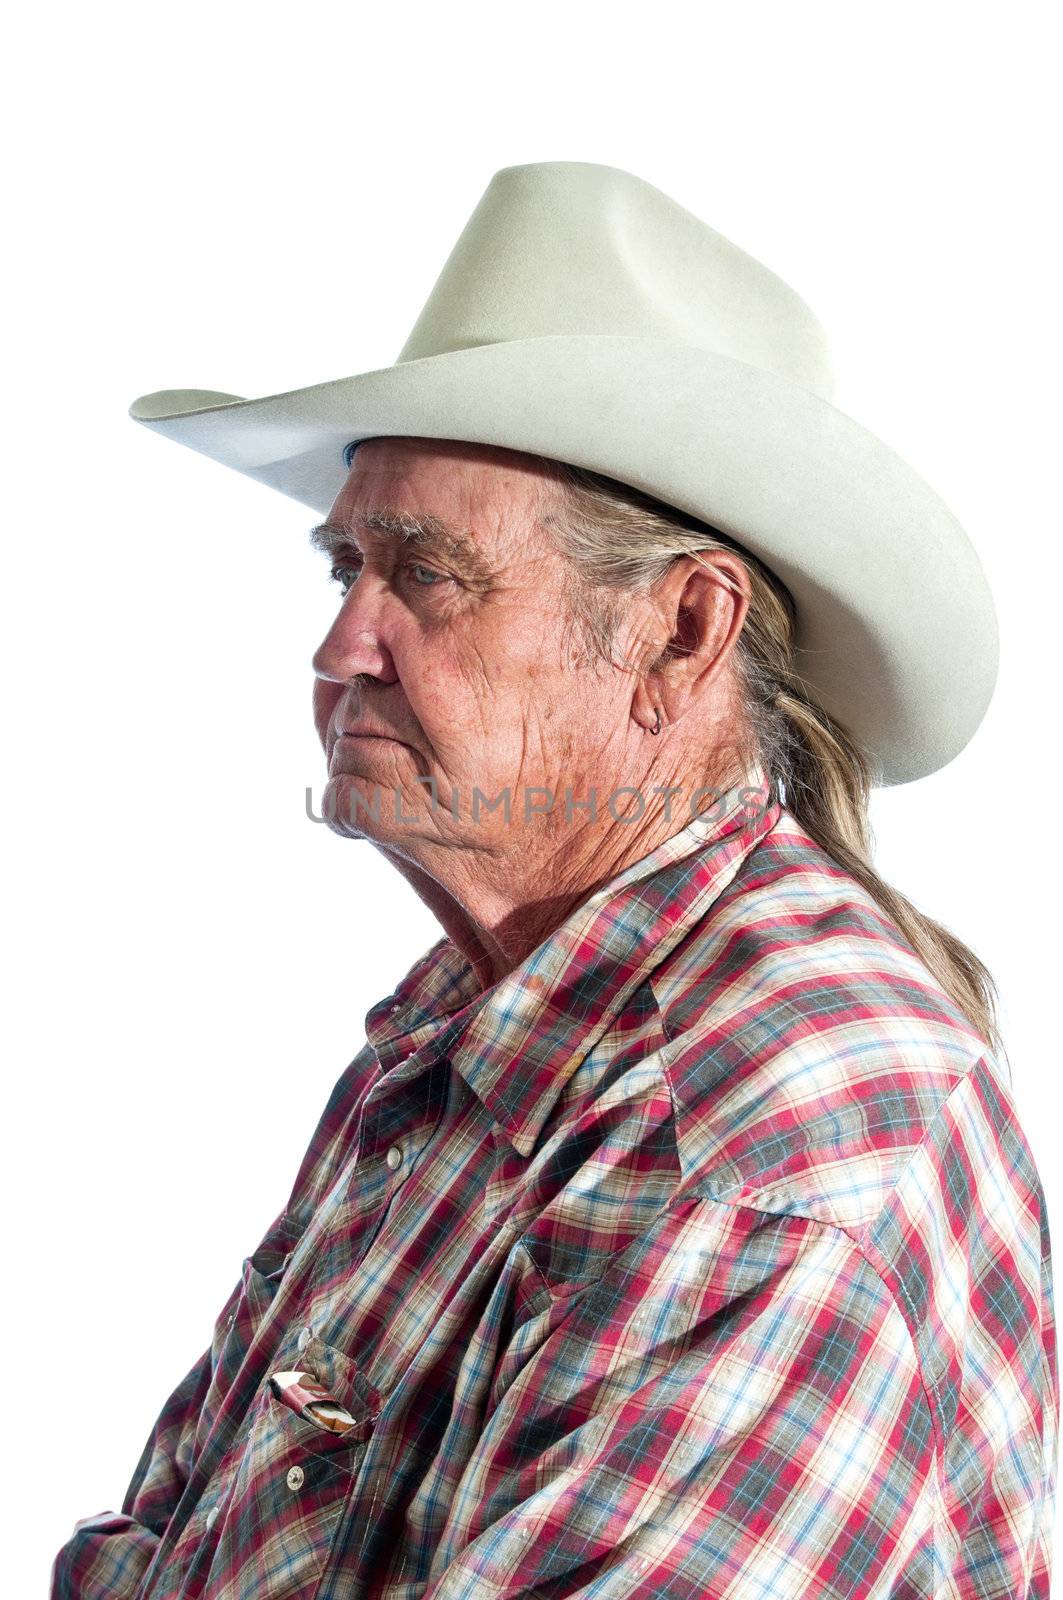 Wisdom written upon his face, a retired  cowboy pauses long enough for a portrait.